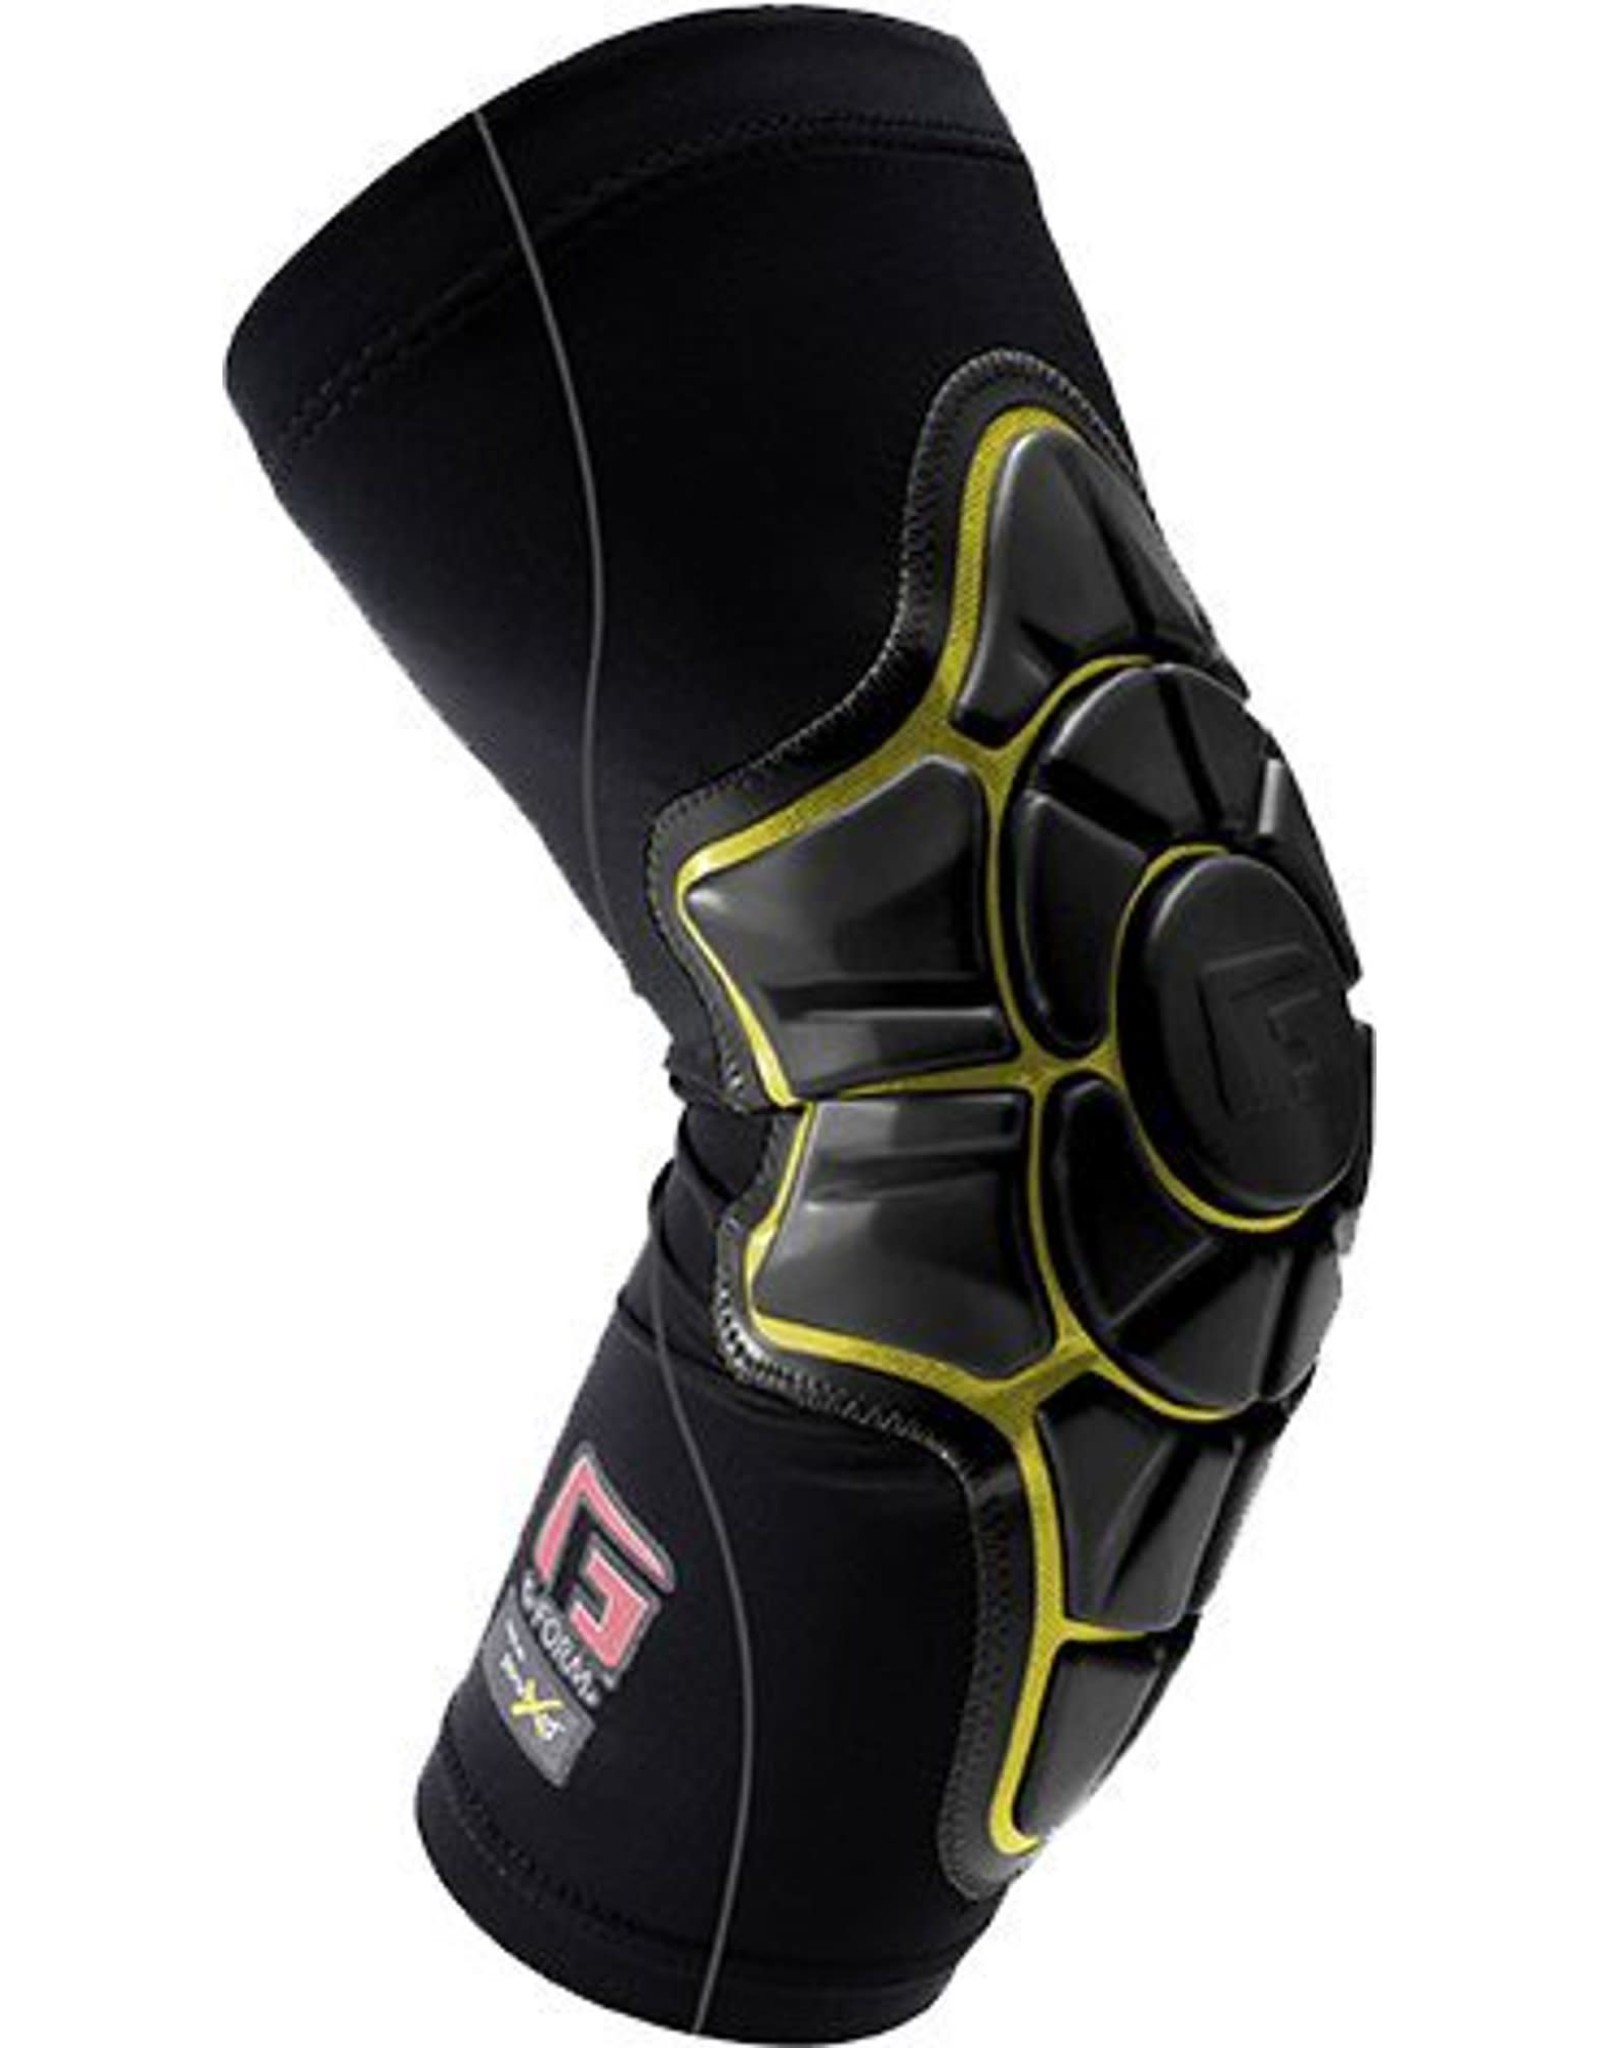 G-FORM G-Form Pro-X, Elbow pads